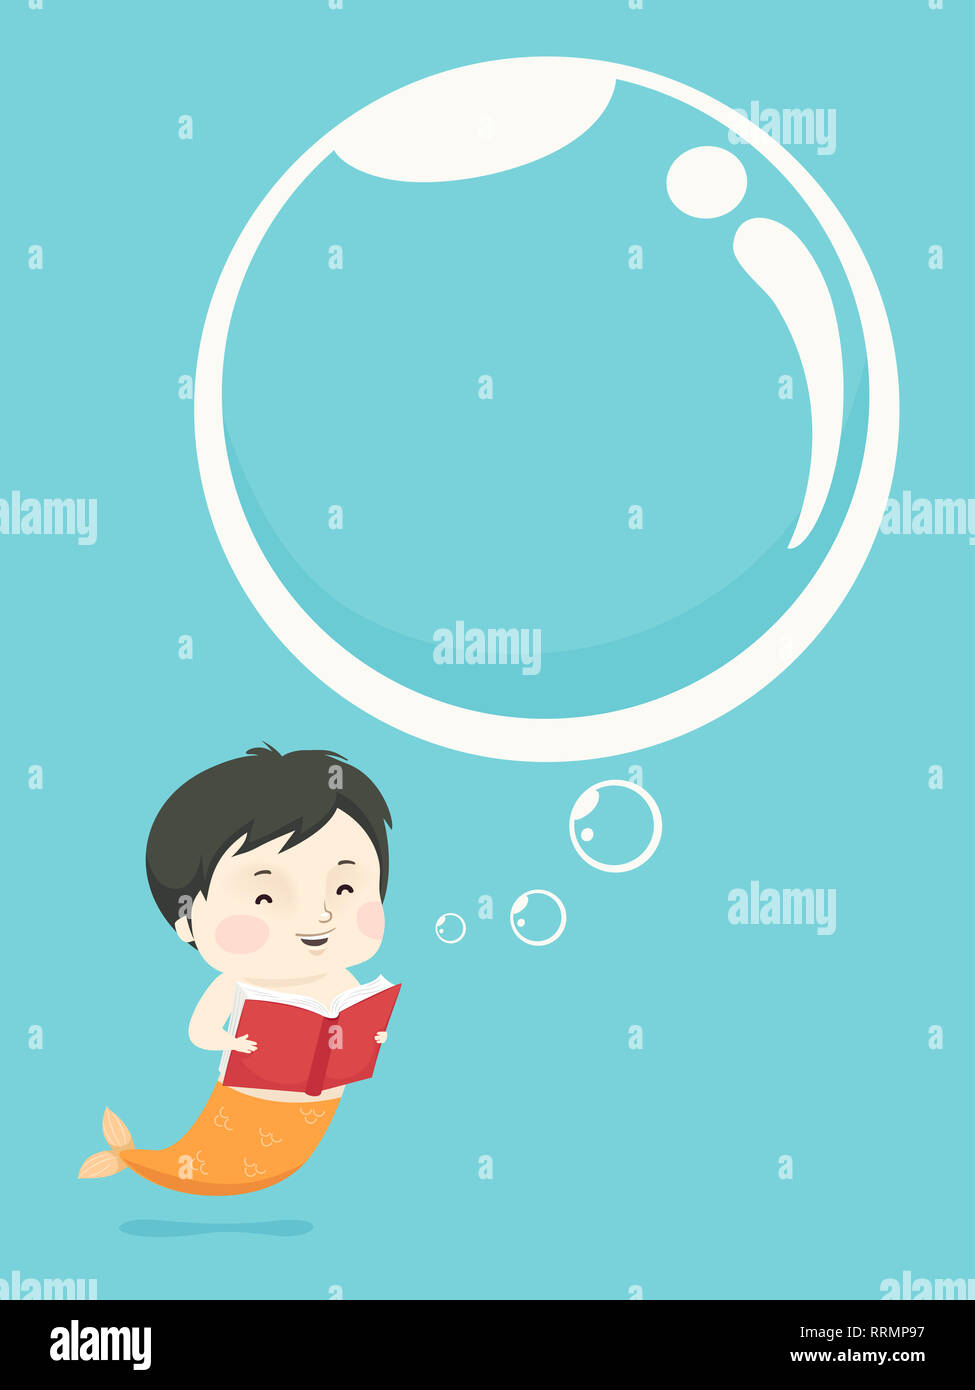 Illustration of a Kid Boy Mermaid with a Thinking Bubble and Reading a Book Stock Photo